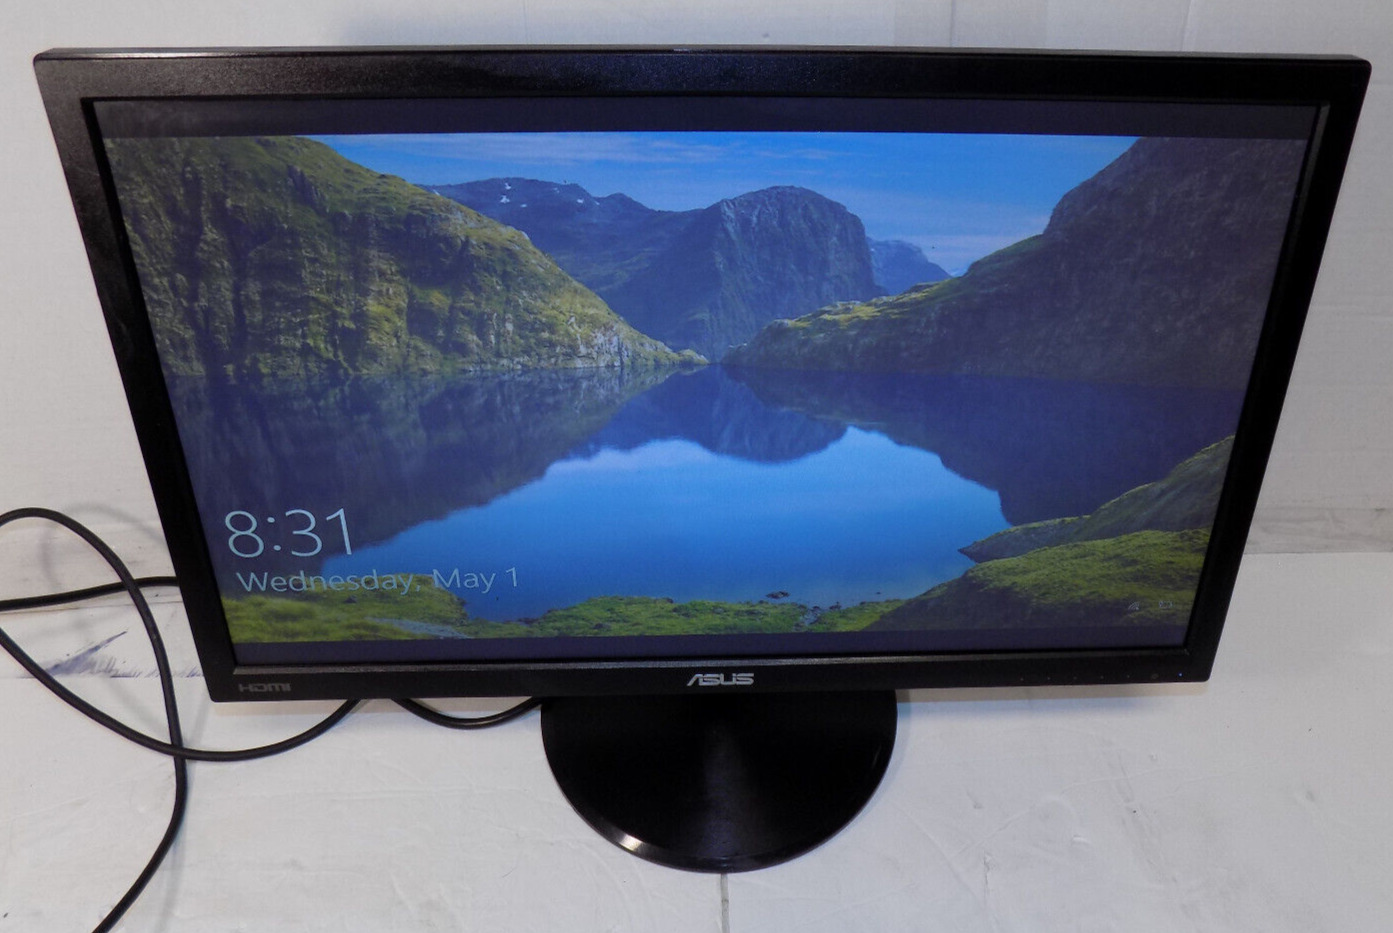 ASUS VP228H LCD Computer Monitor 21.5 Inch Wide Screen with Cables